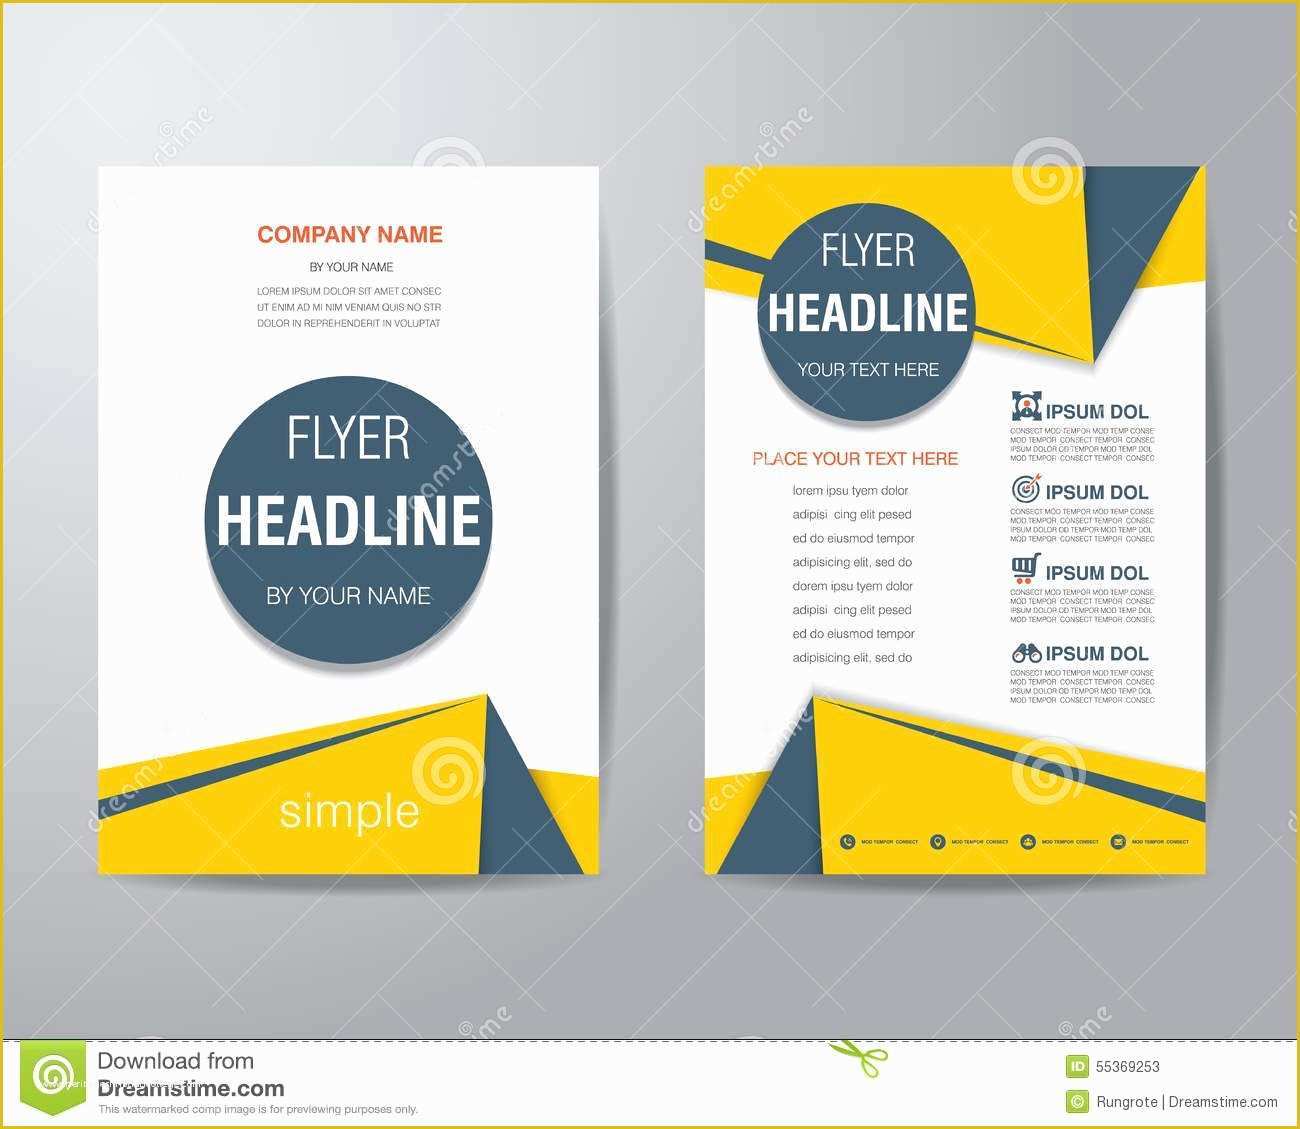 Free Flyer Brochure Templates Of Pin by Leelentine On Cadspec Marketing Ideas